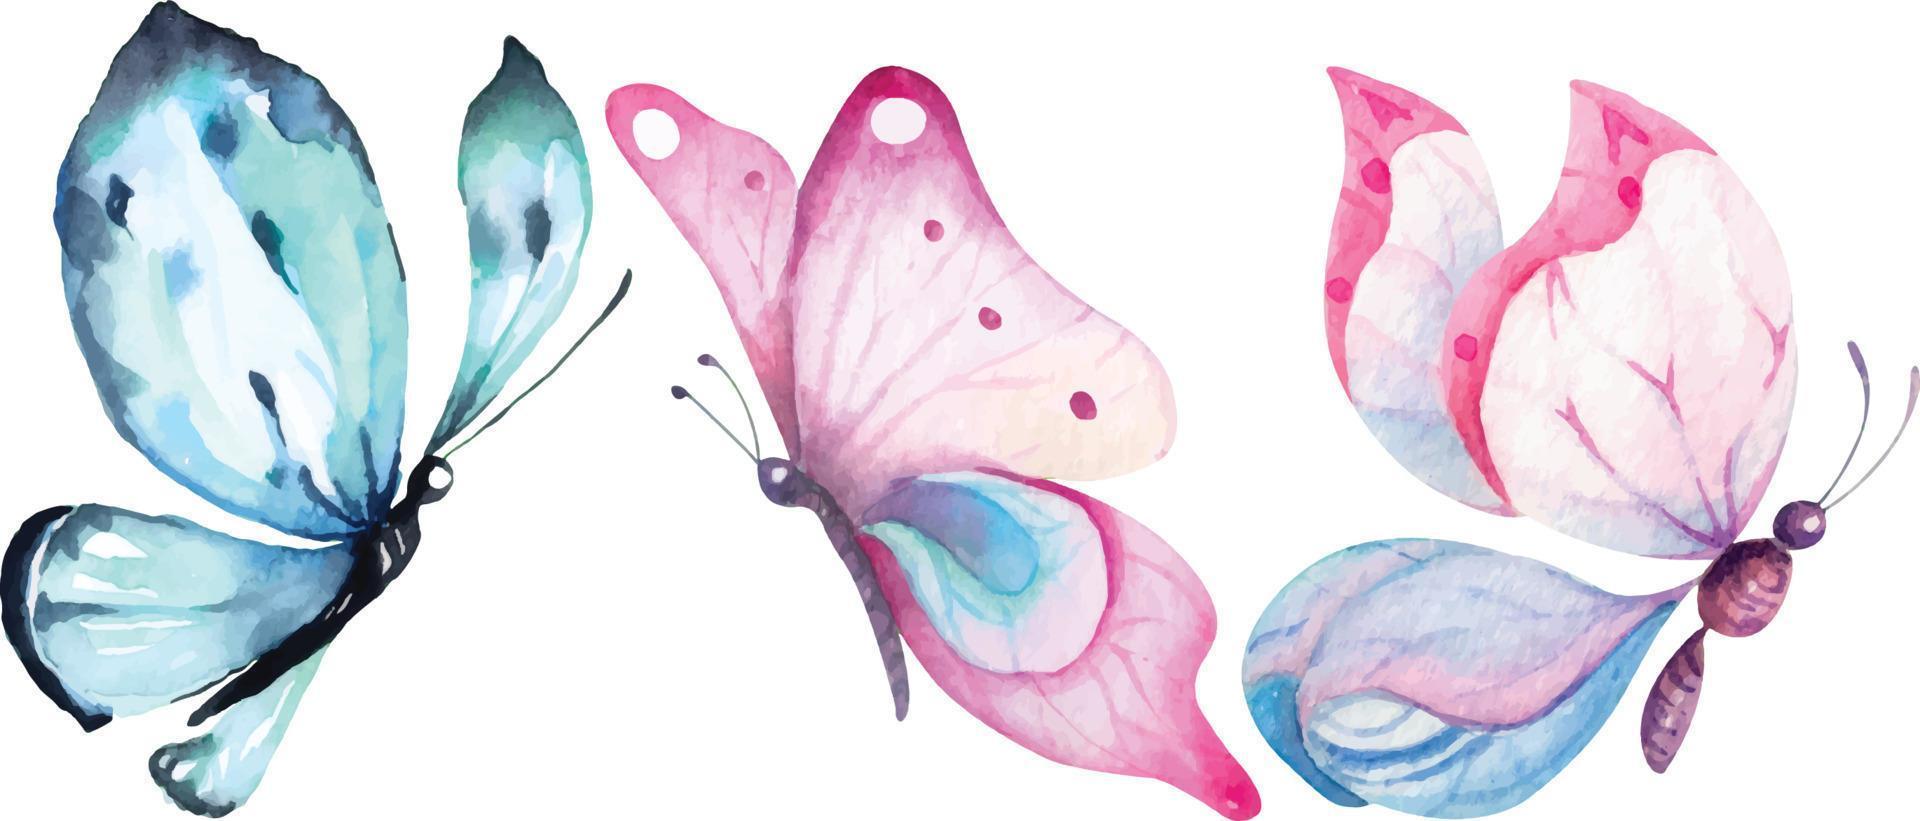 butterfly painted with watercolors 10 vector